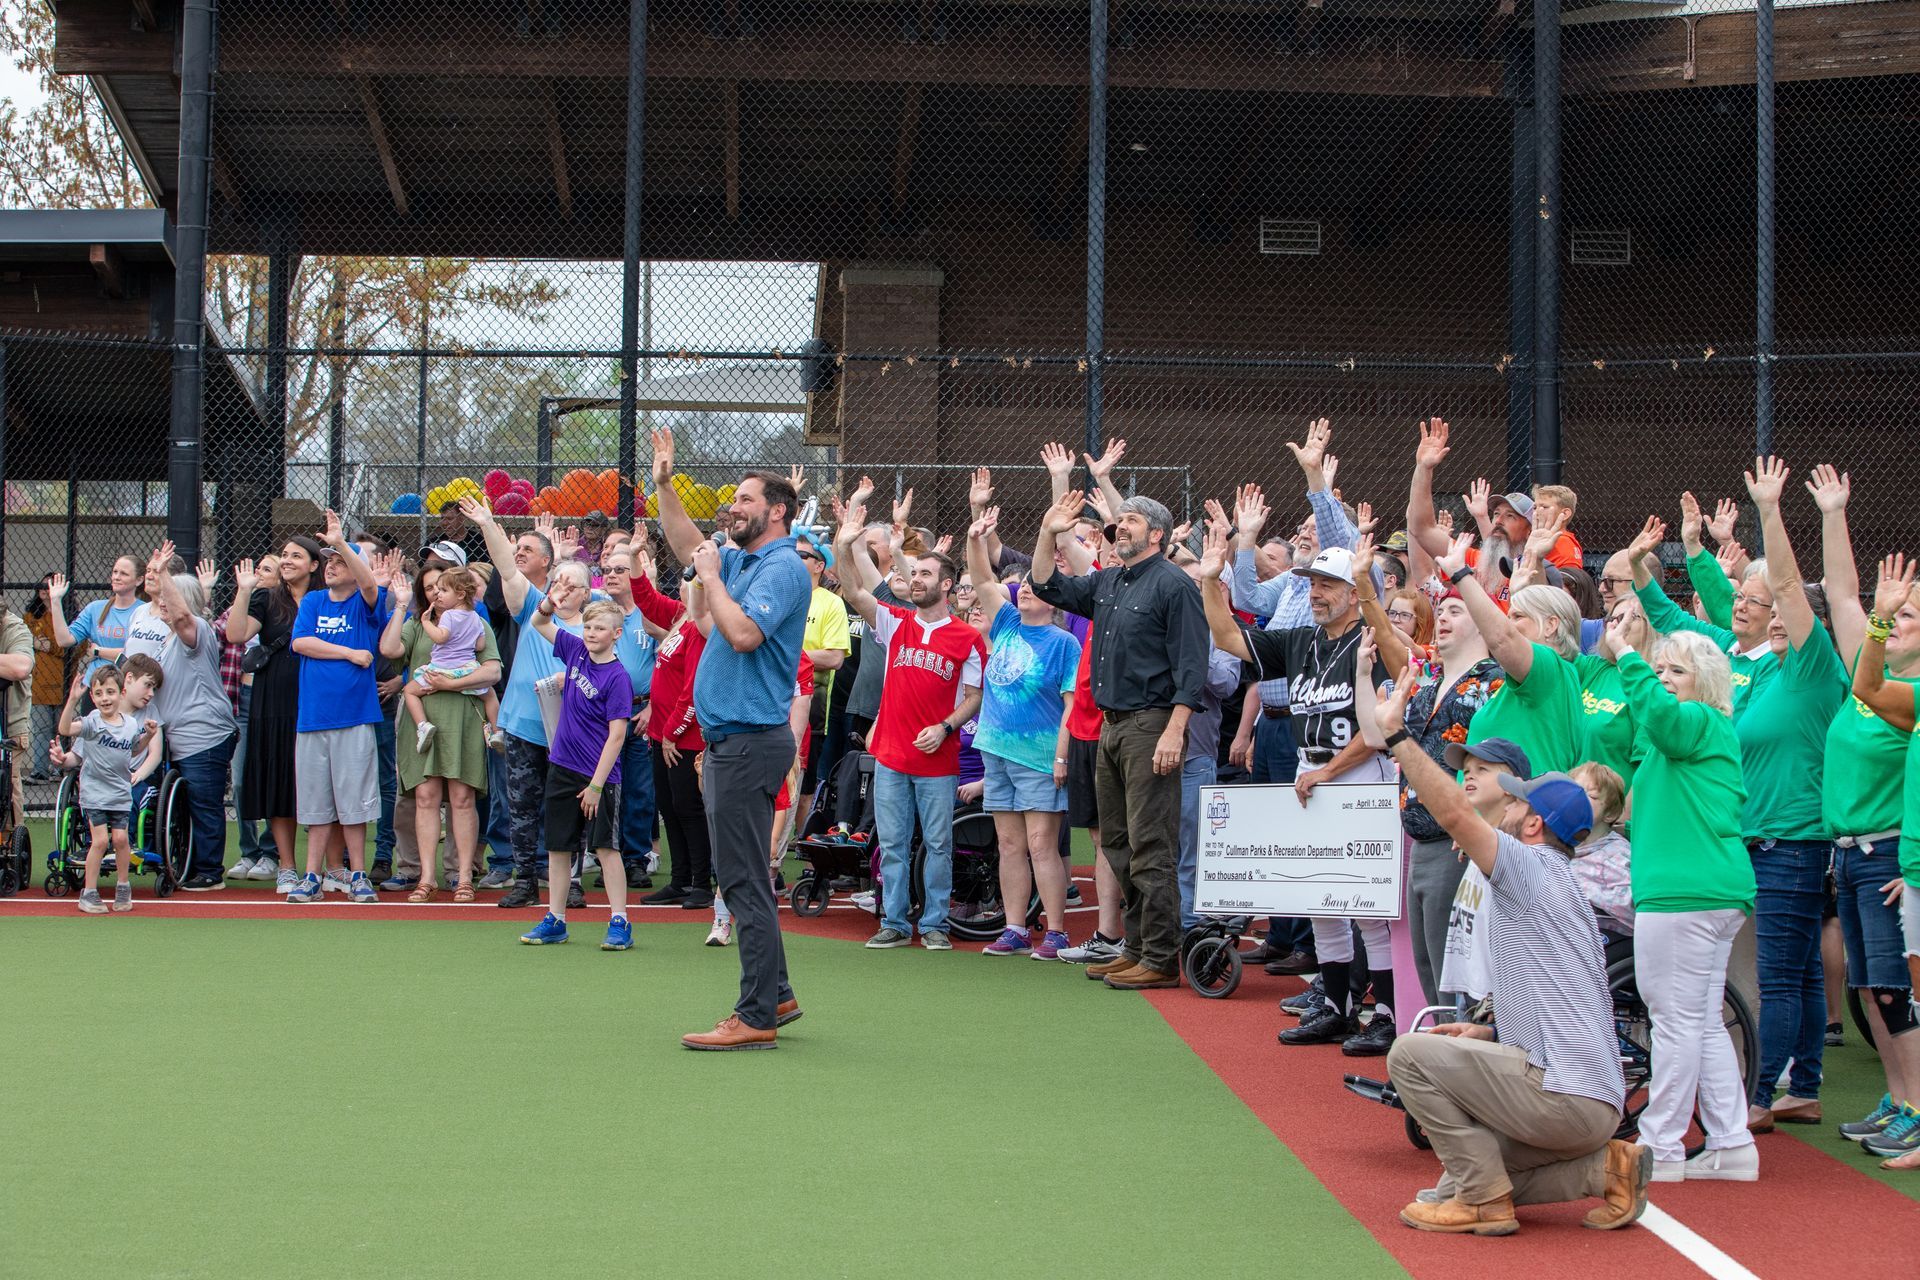 A group of people are standing on a baseball field with their hands in the air.